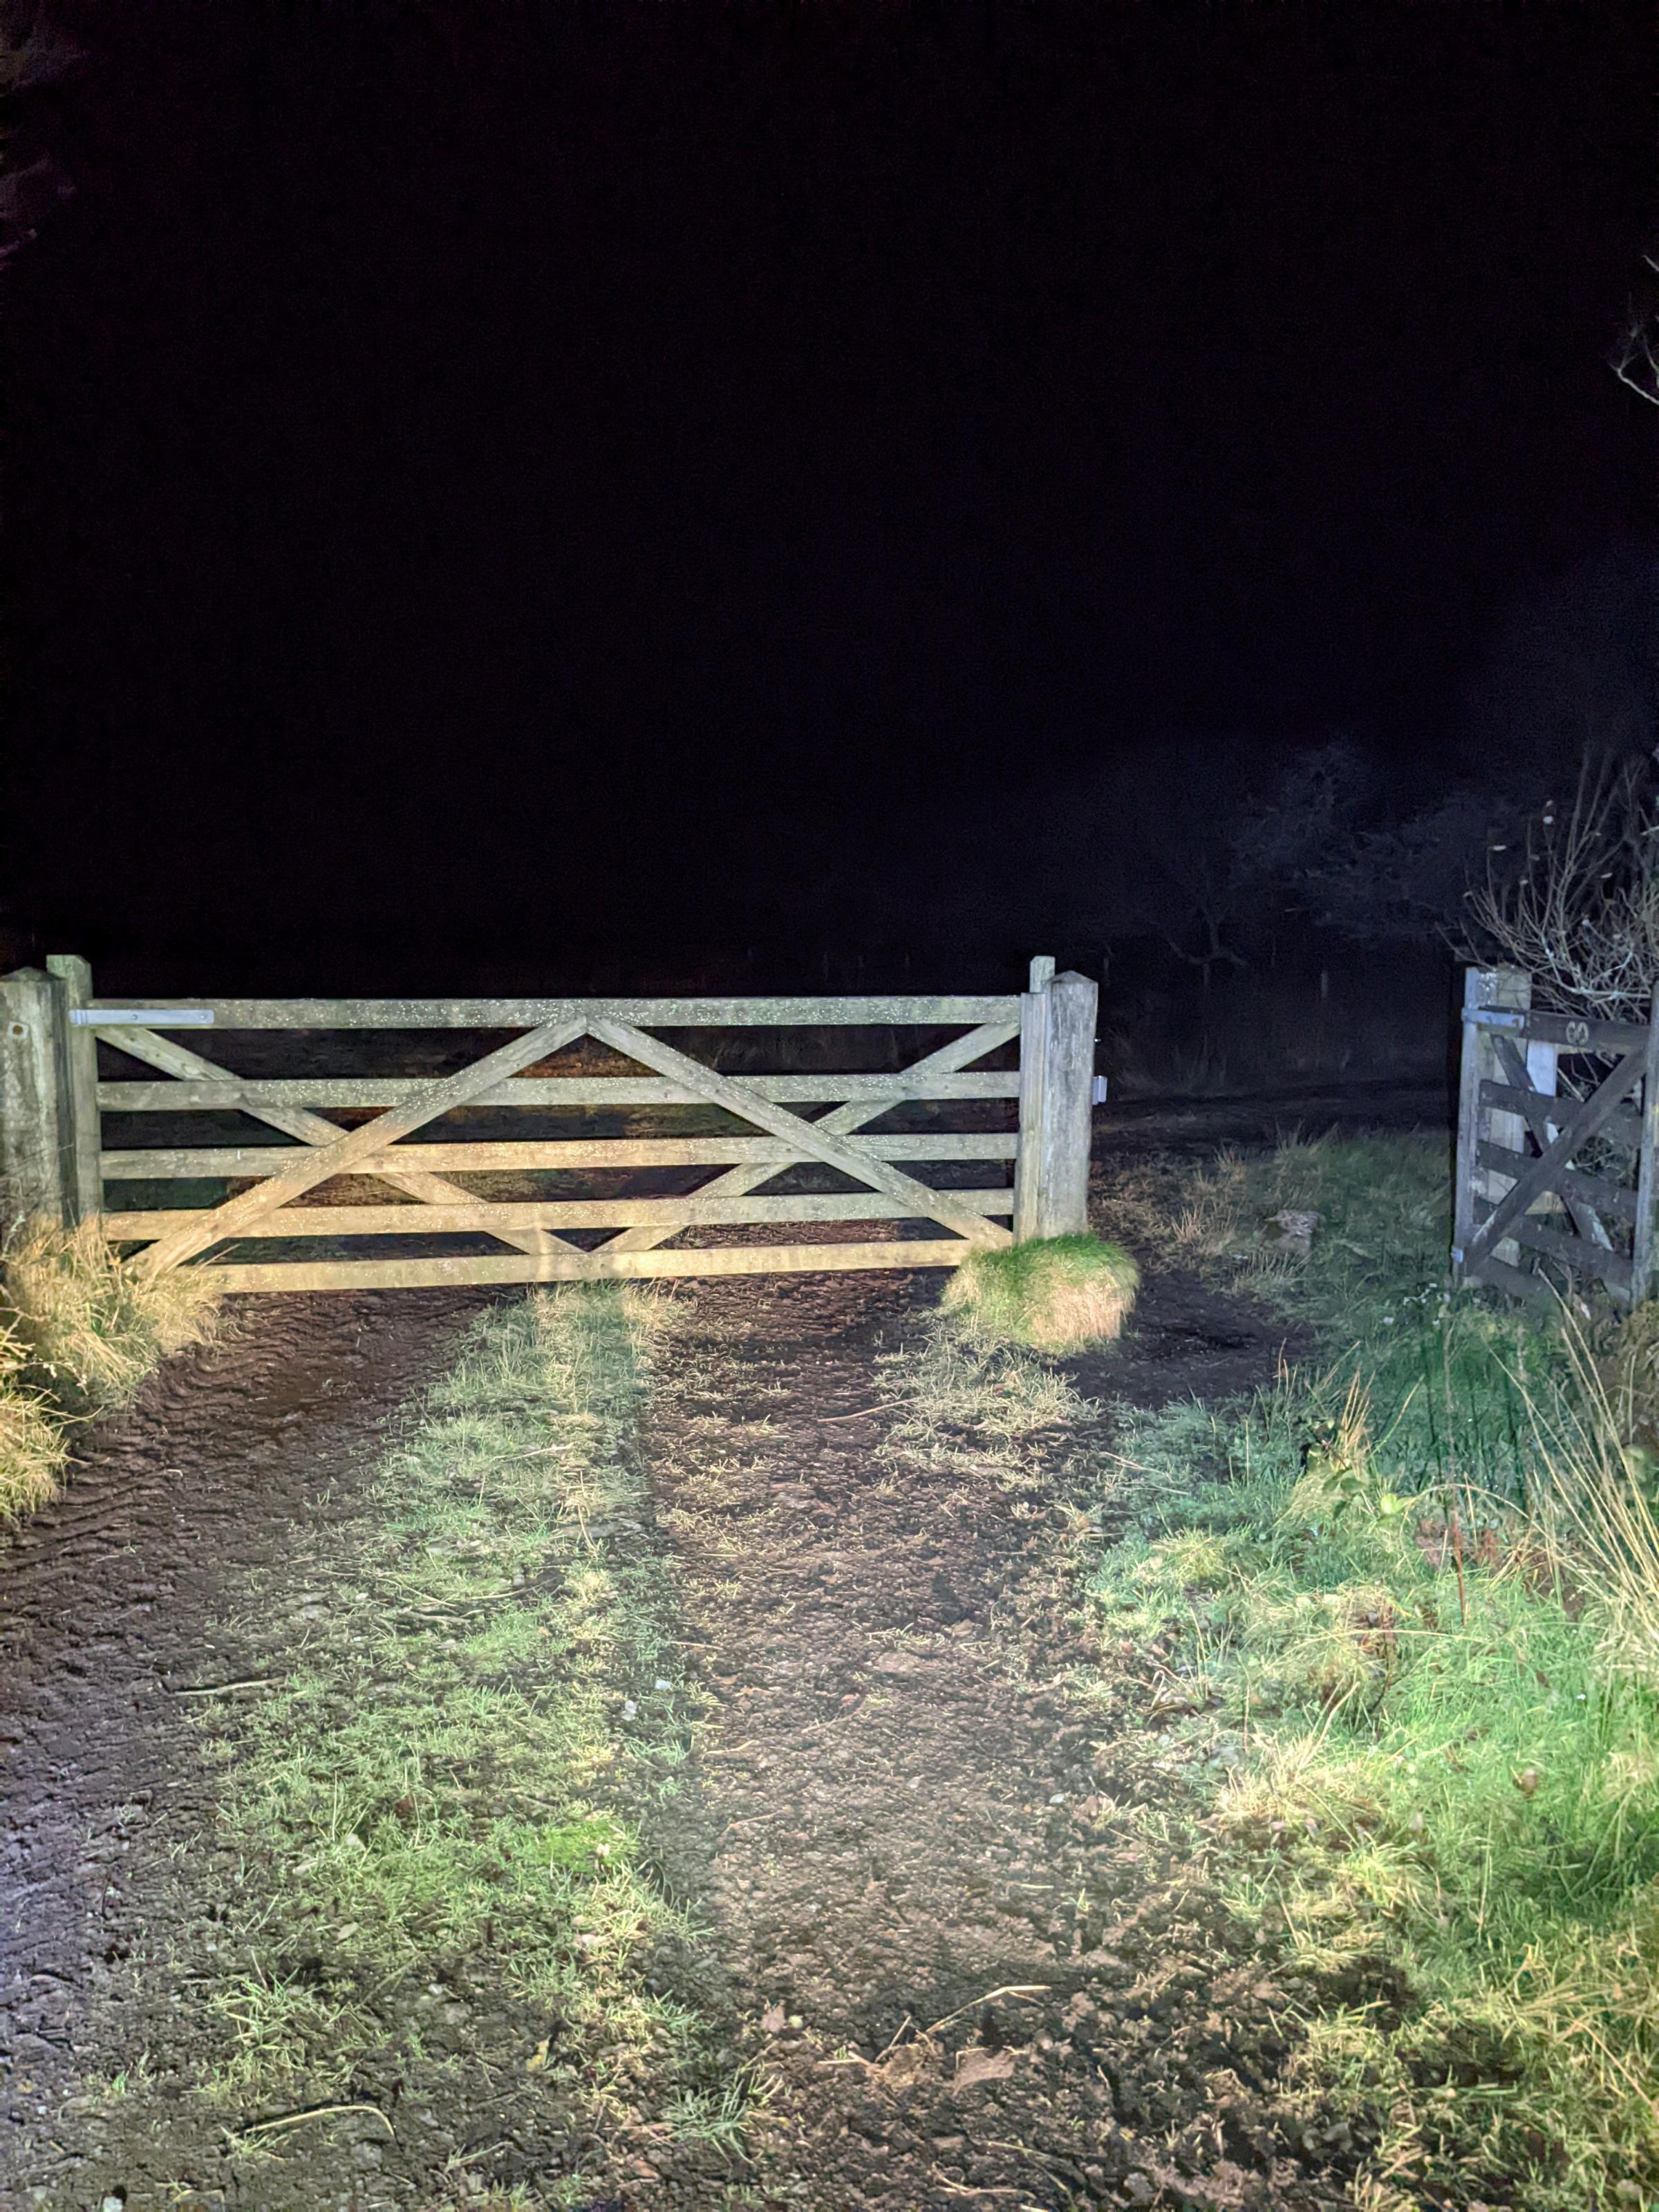 The gate had been left open, letting the cattle escape